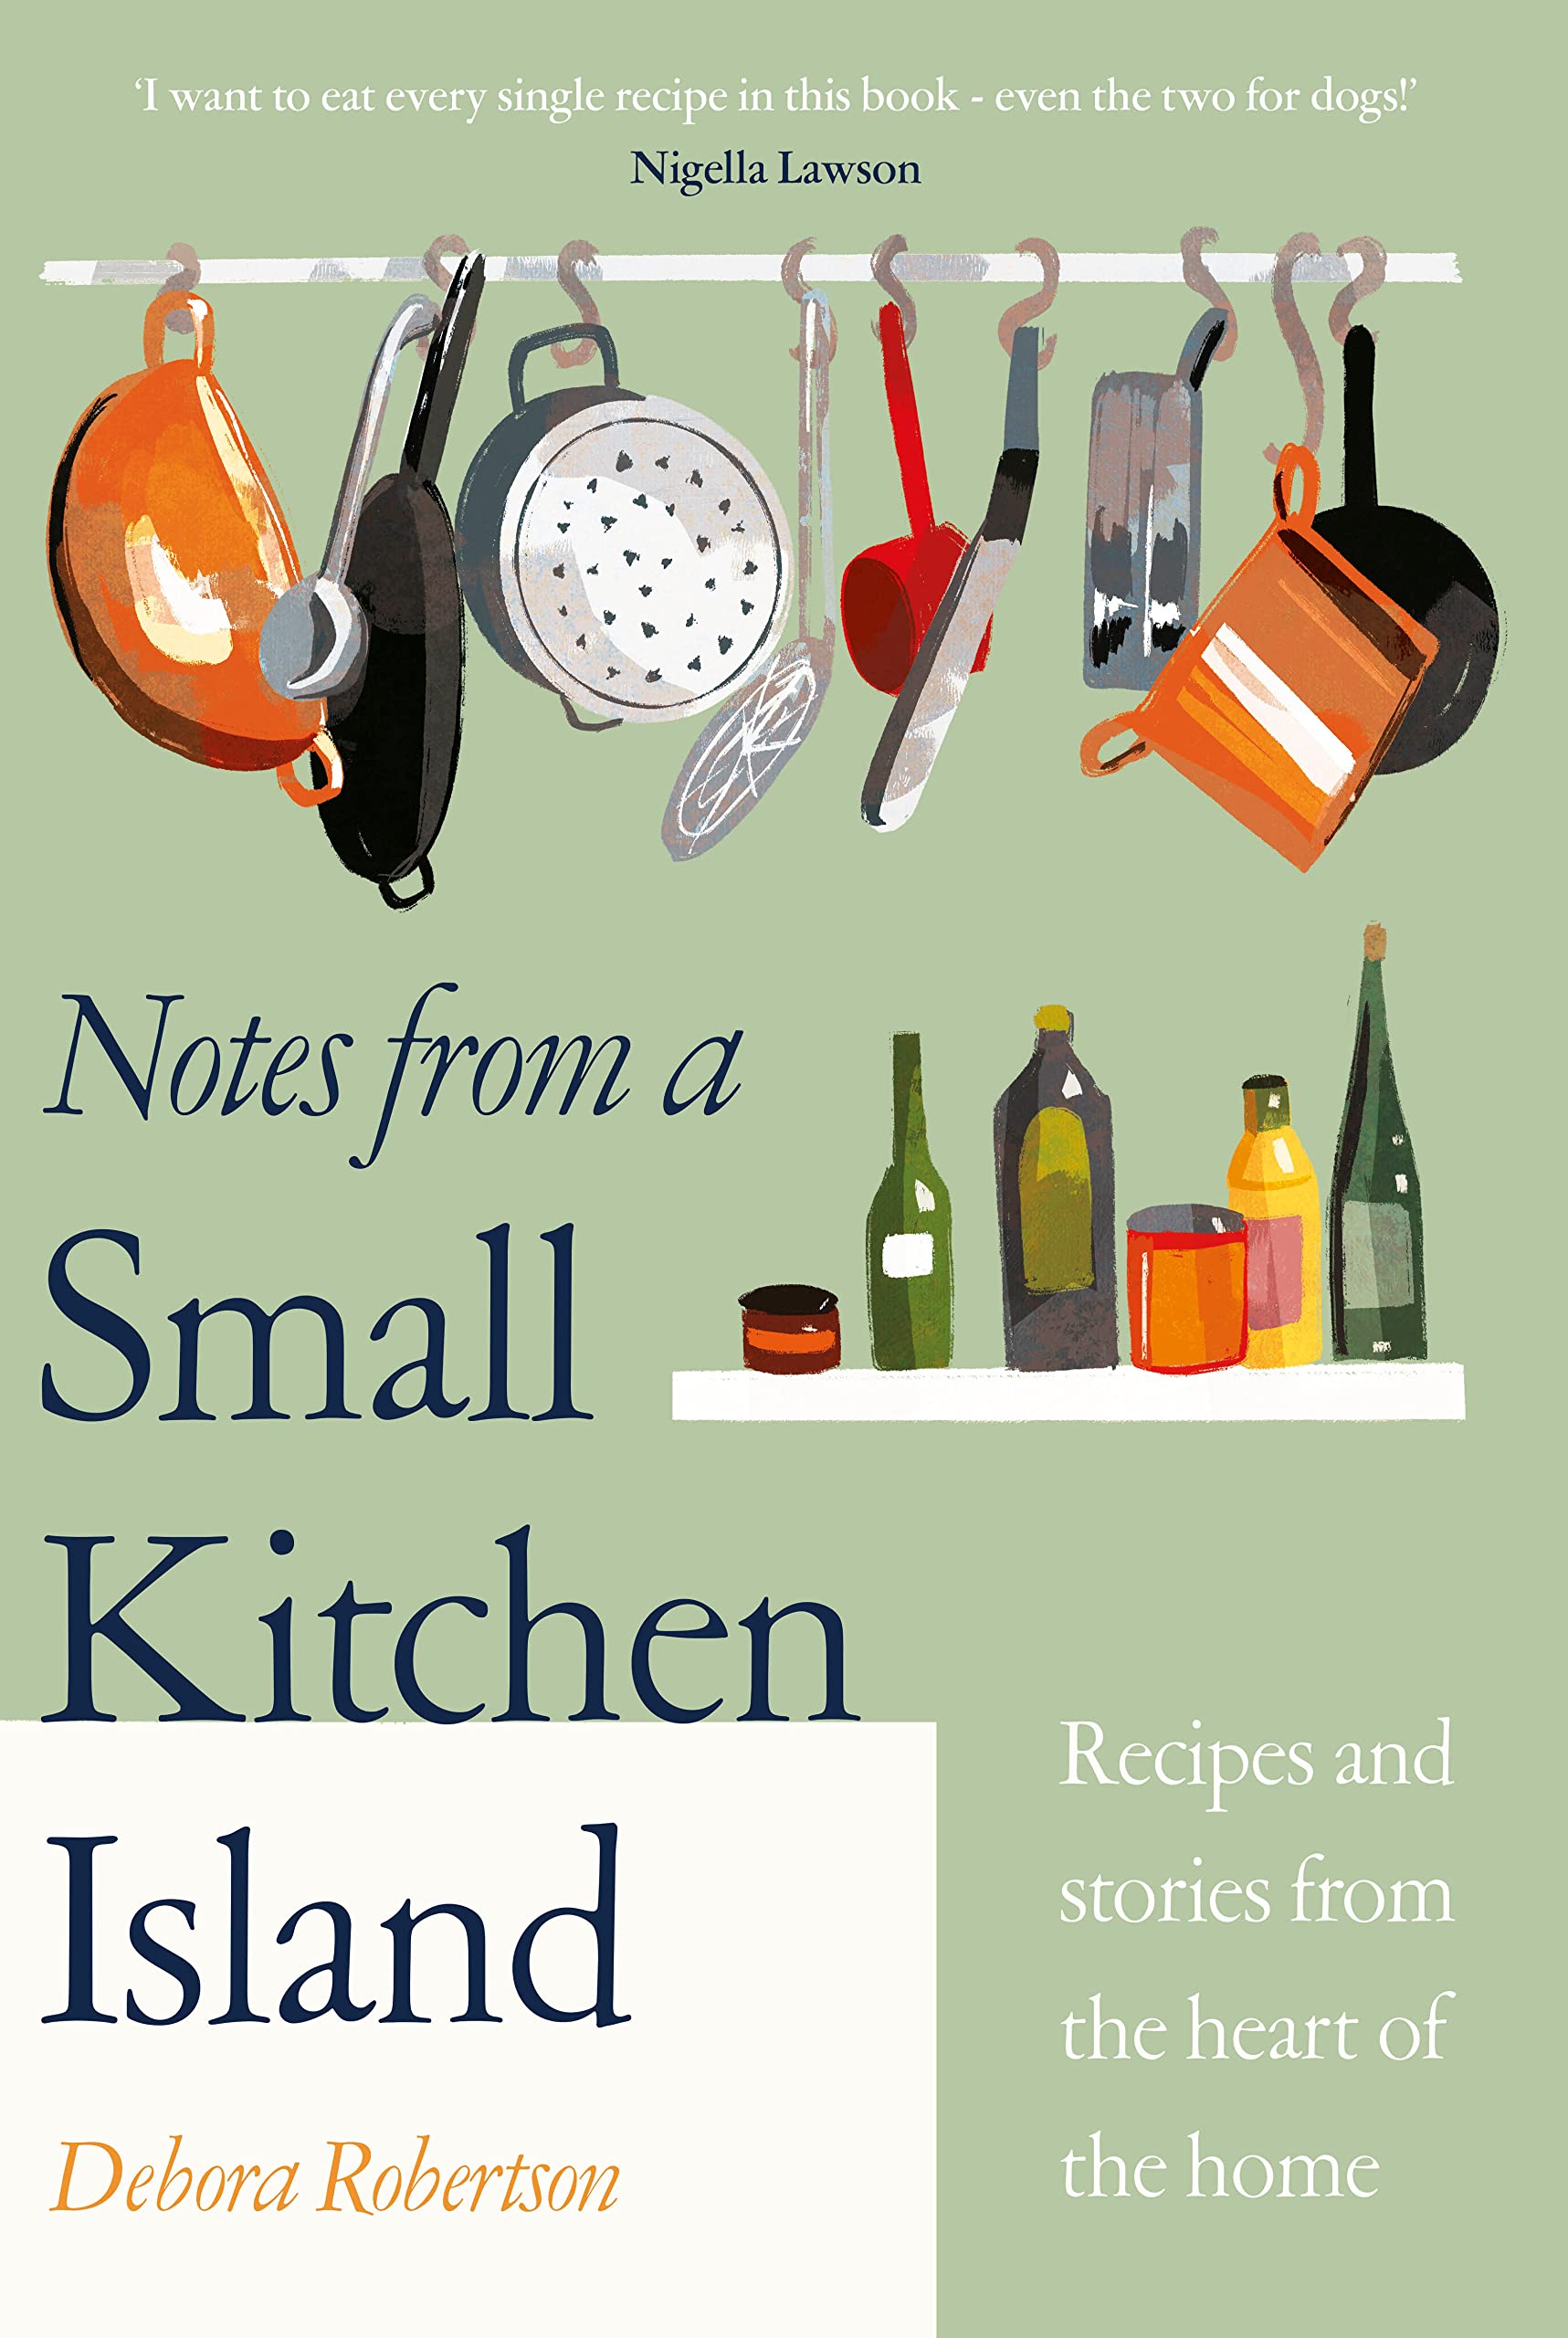 Notes from a Small Kitchen Island (Debora Robertson)